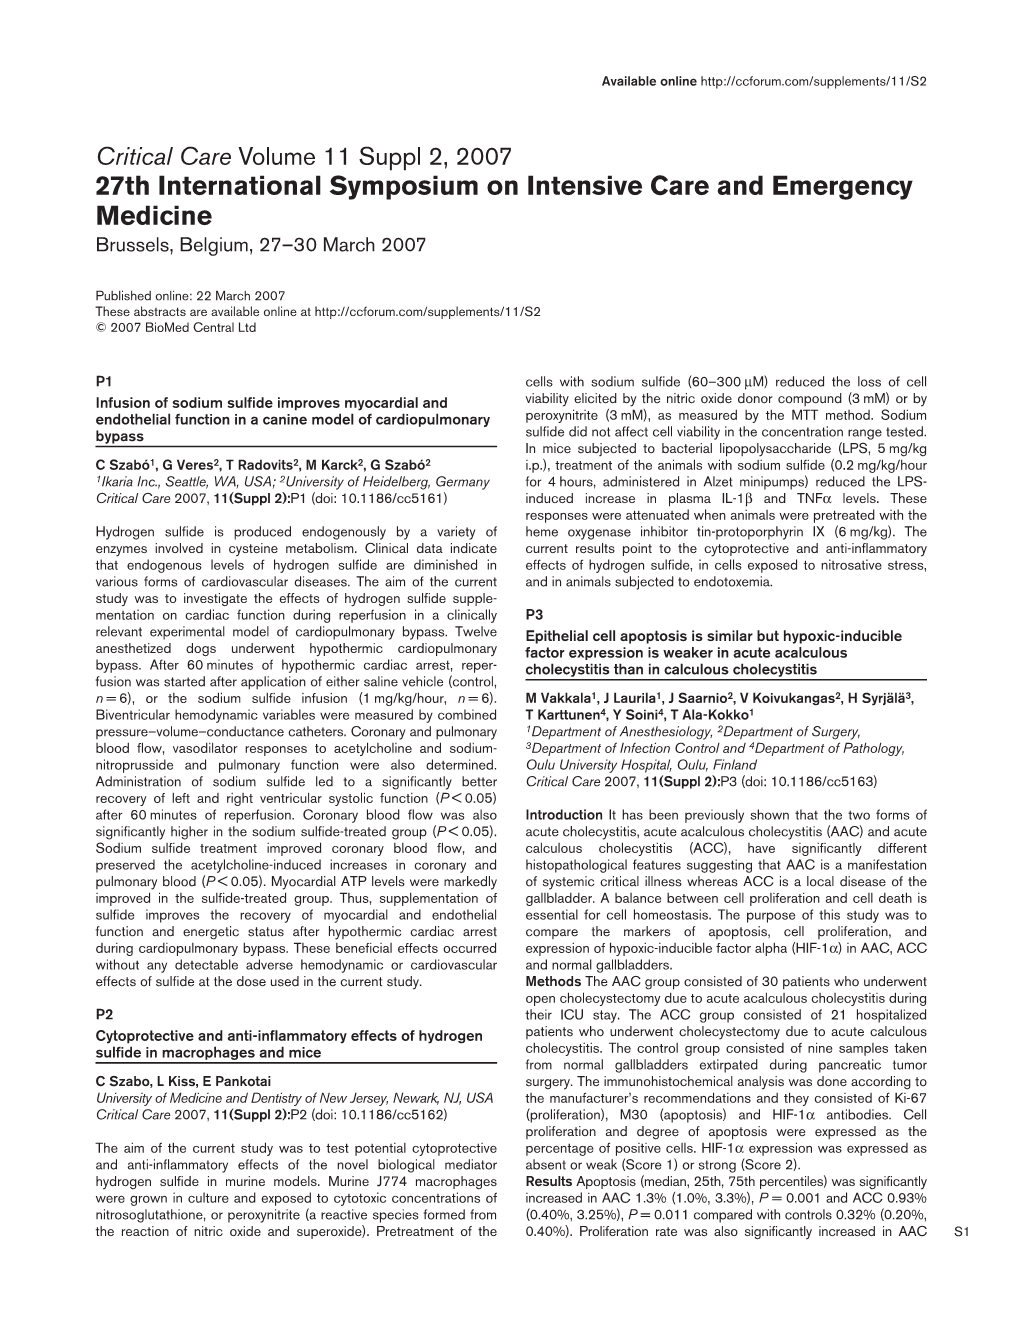 27Th International Symposium on Intensive Care and Emergency Medicine Brussels, Belgium, 27–30 March 2007